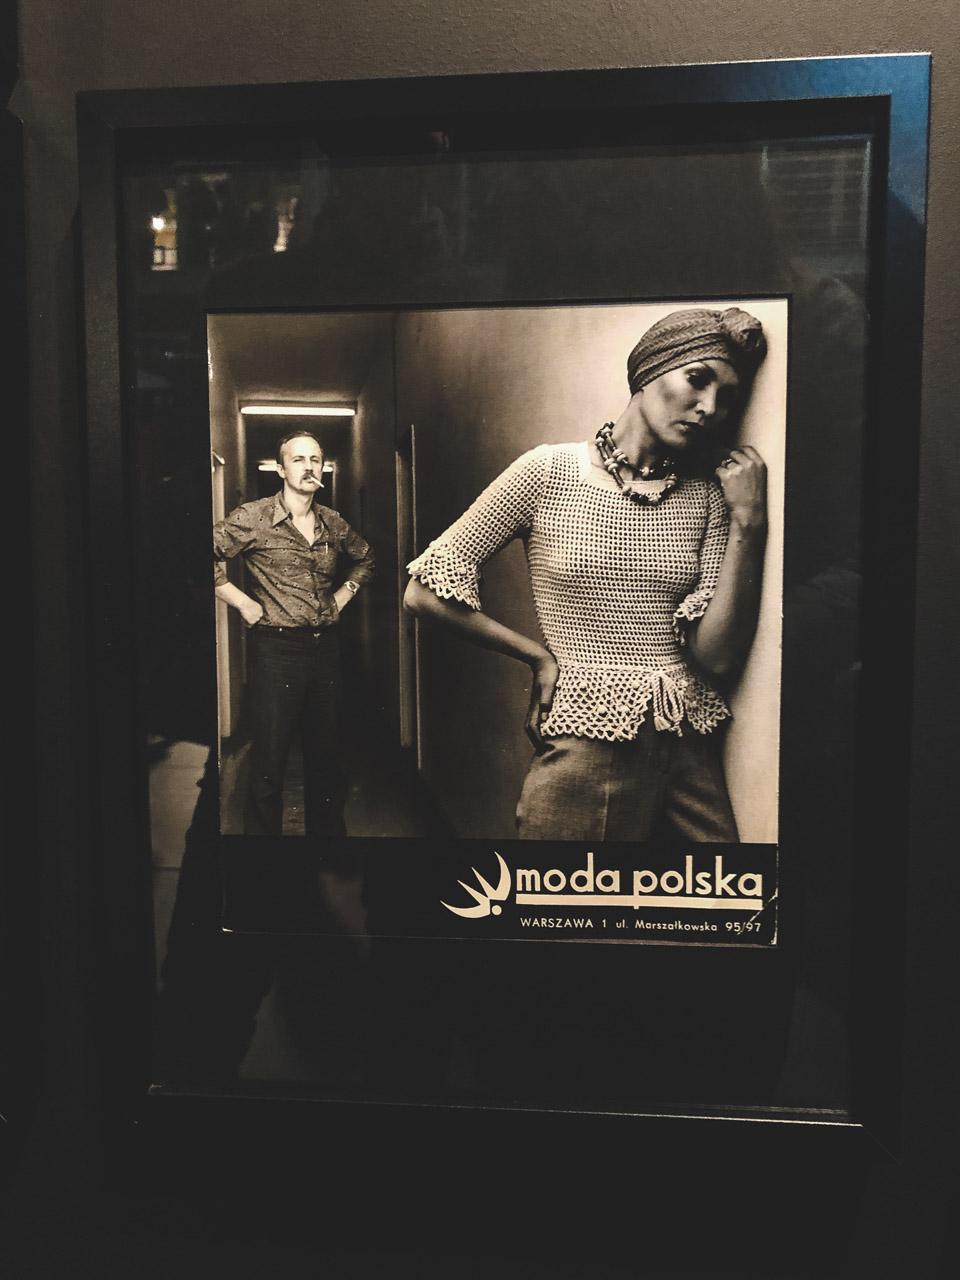 An old advertisement of Moda Polska at The Central Museum of Textiles in Łódź, Poland